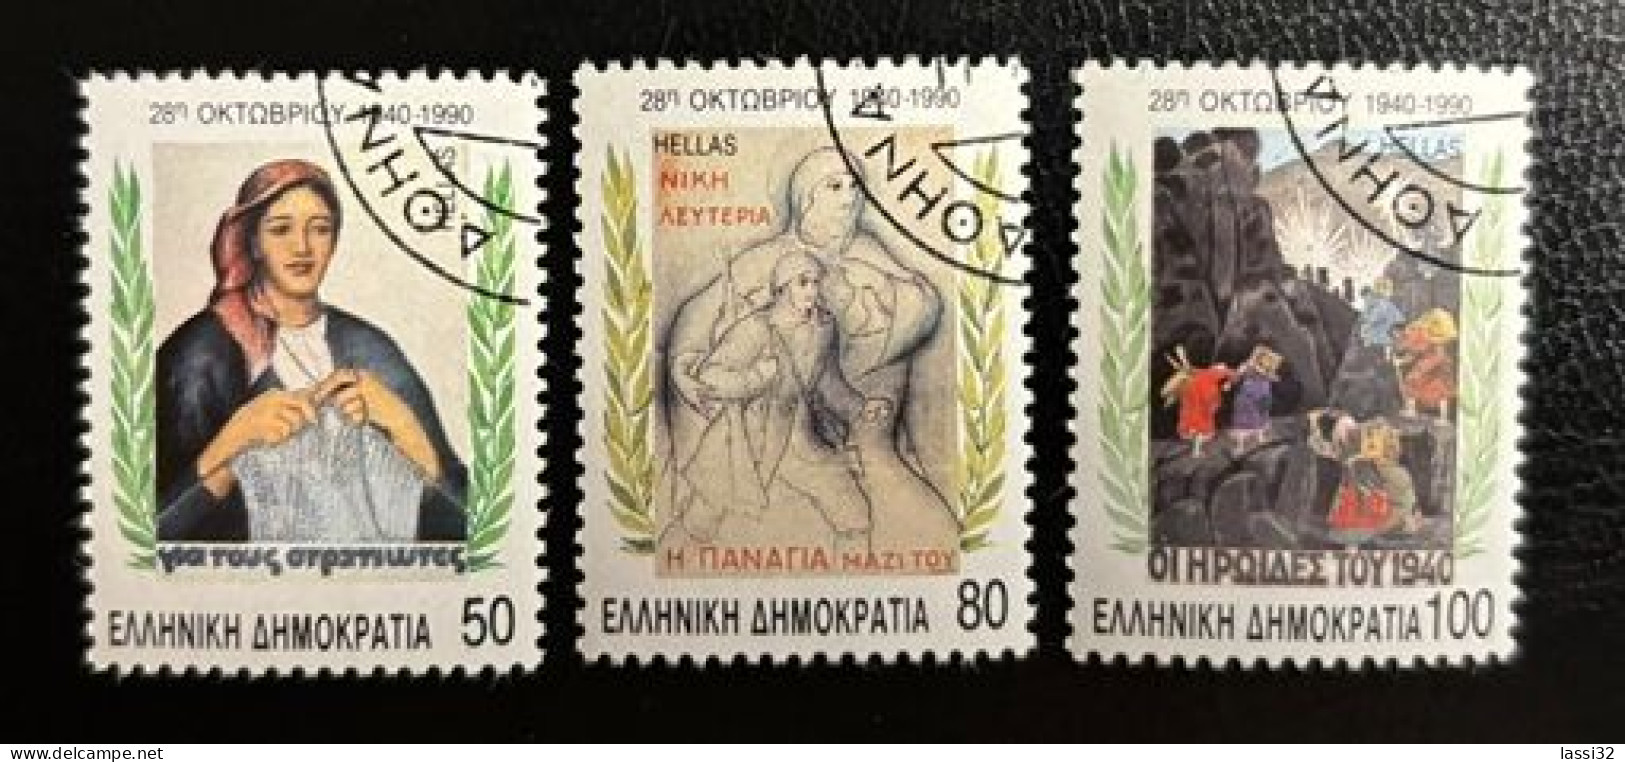 GREECE,1990. 50th ANNIVERSARY OF "NO" OCTOBER 28th 1940, USED - Usati